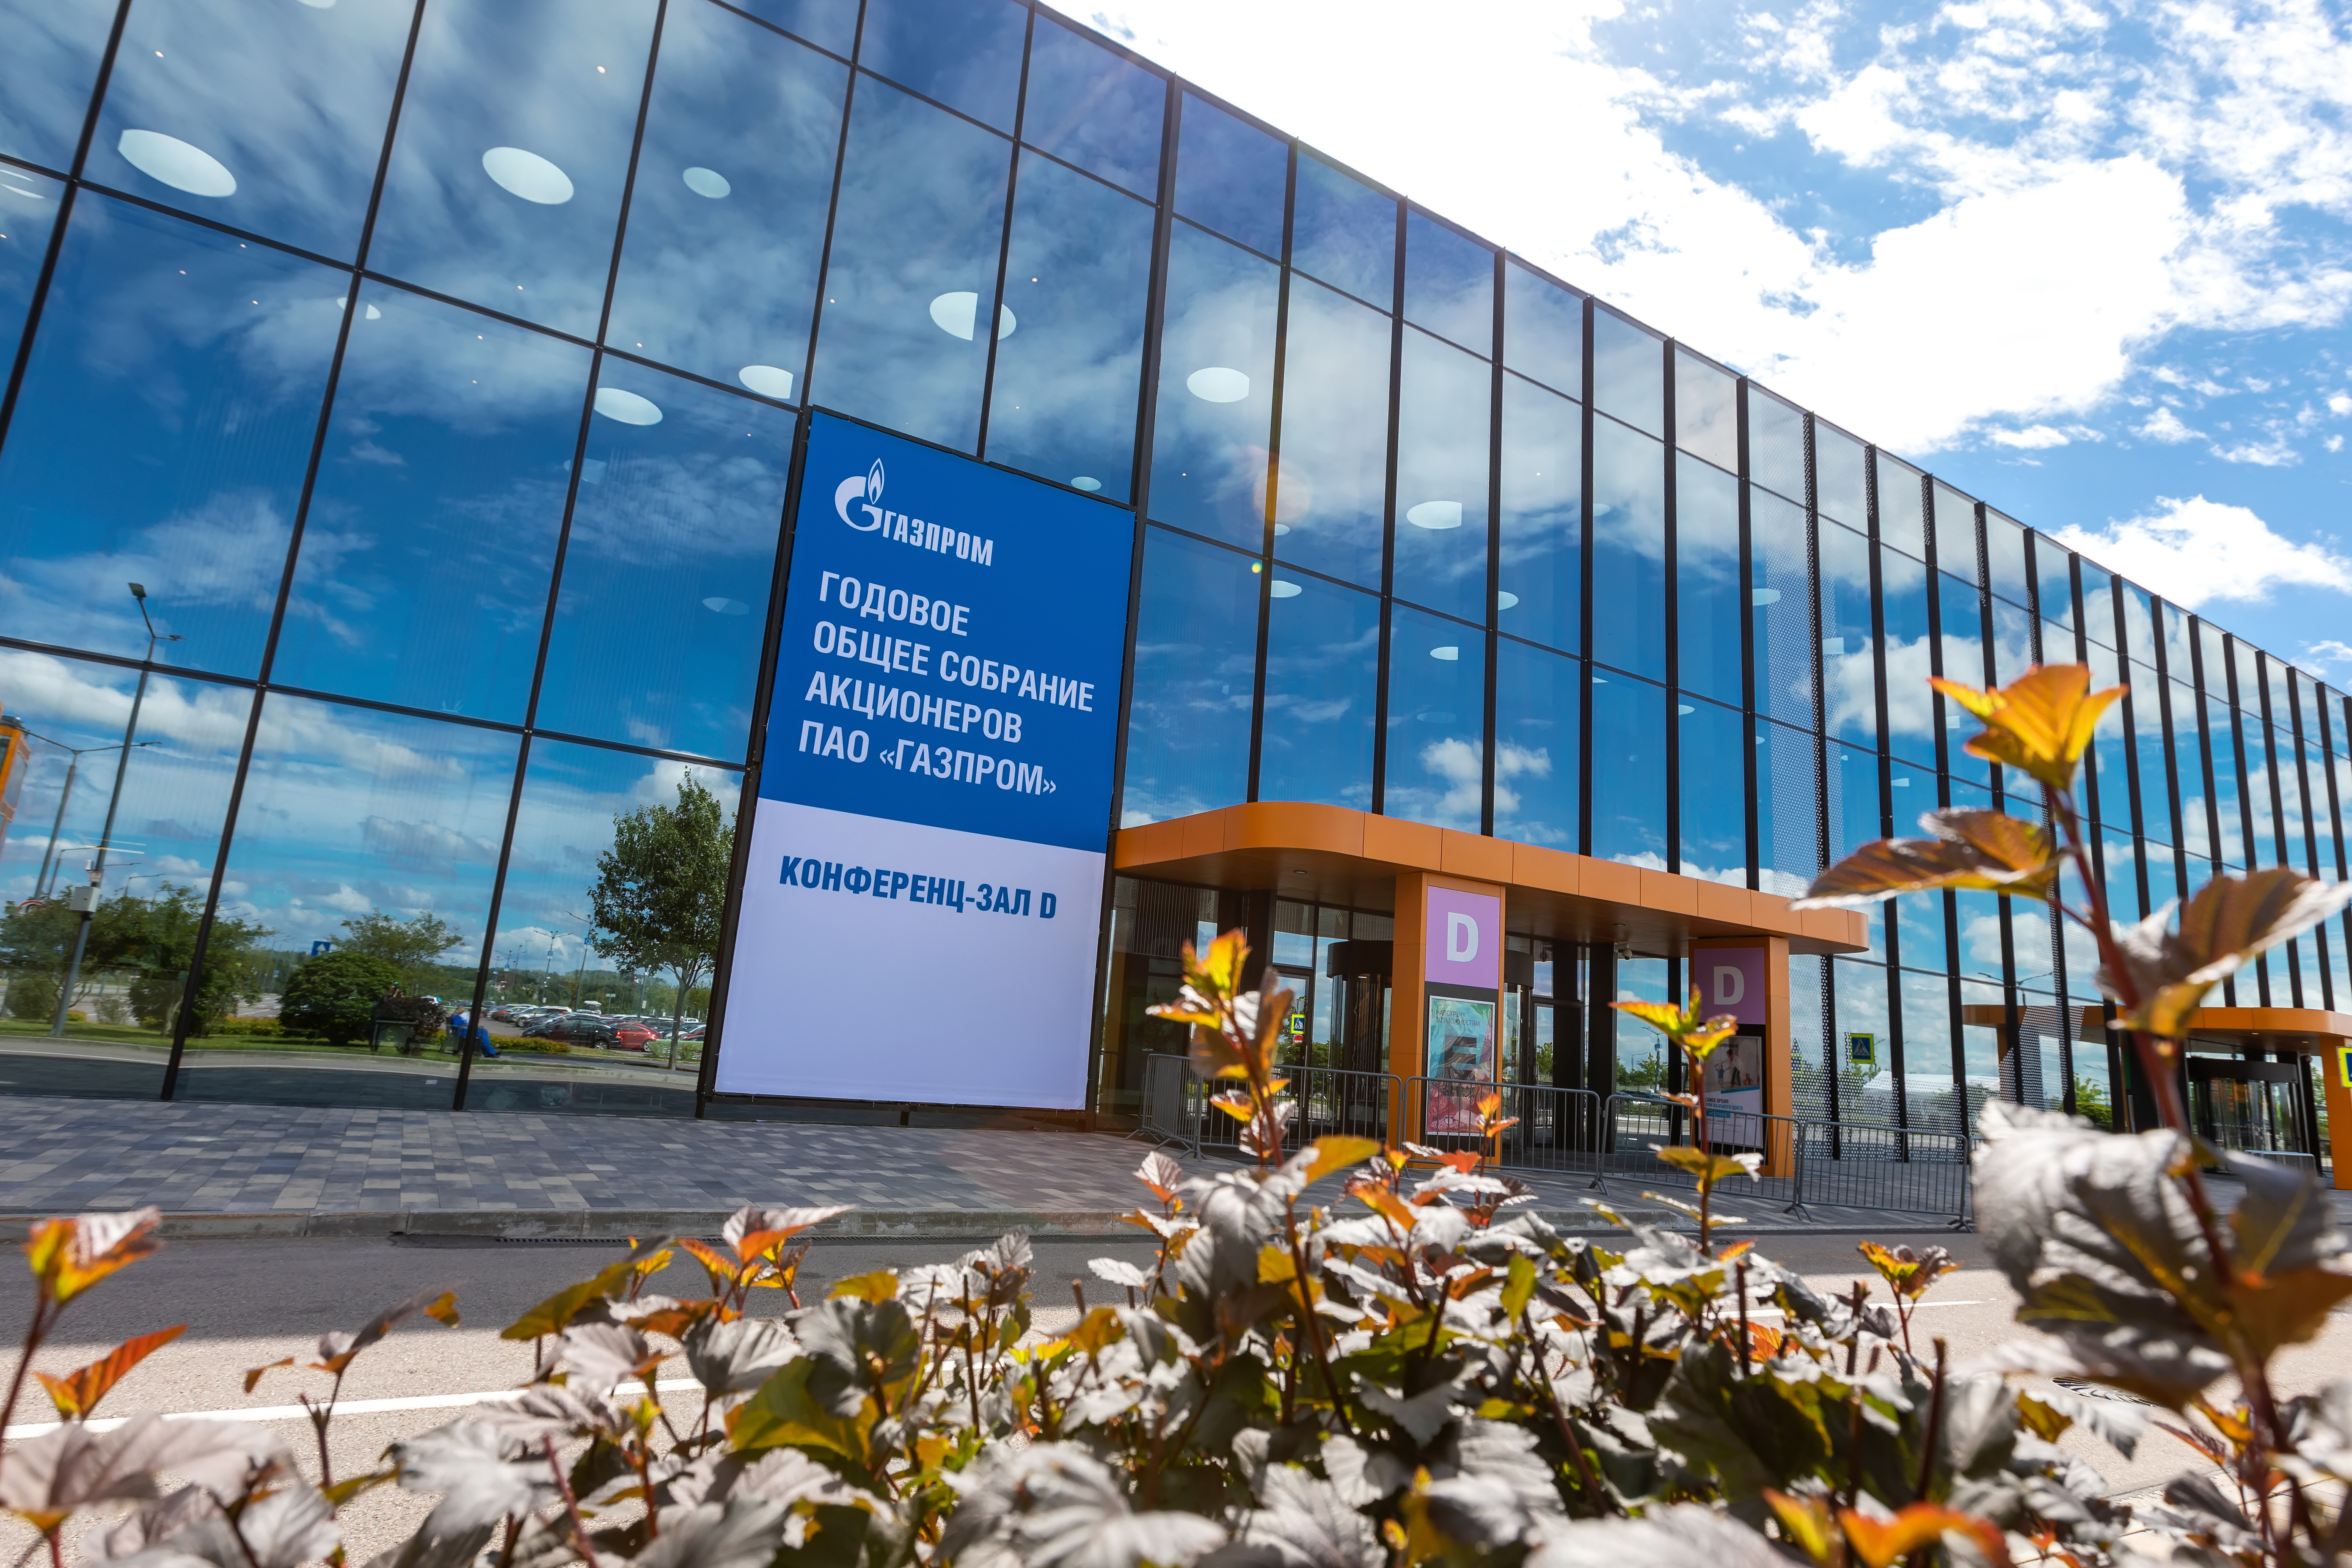 Accreditation of journalists for Gazprom’s General Shareholders Meeting